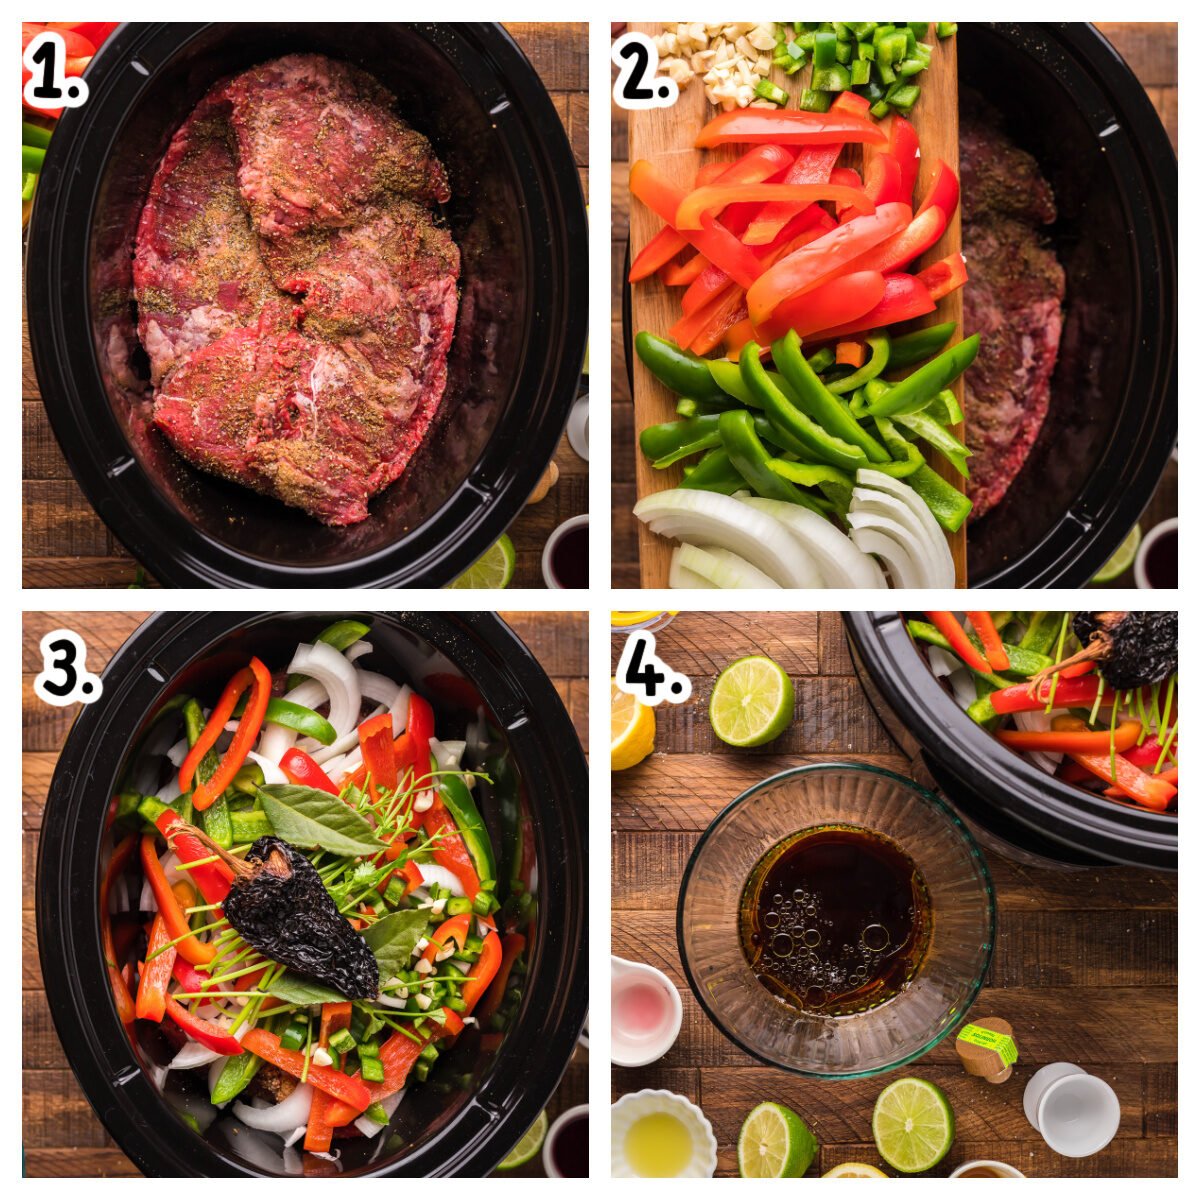 4 images about how to assemble carne asada meat, vegetable and sauce in slow cooker.